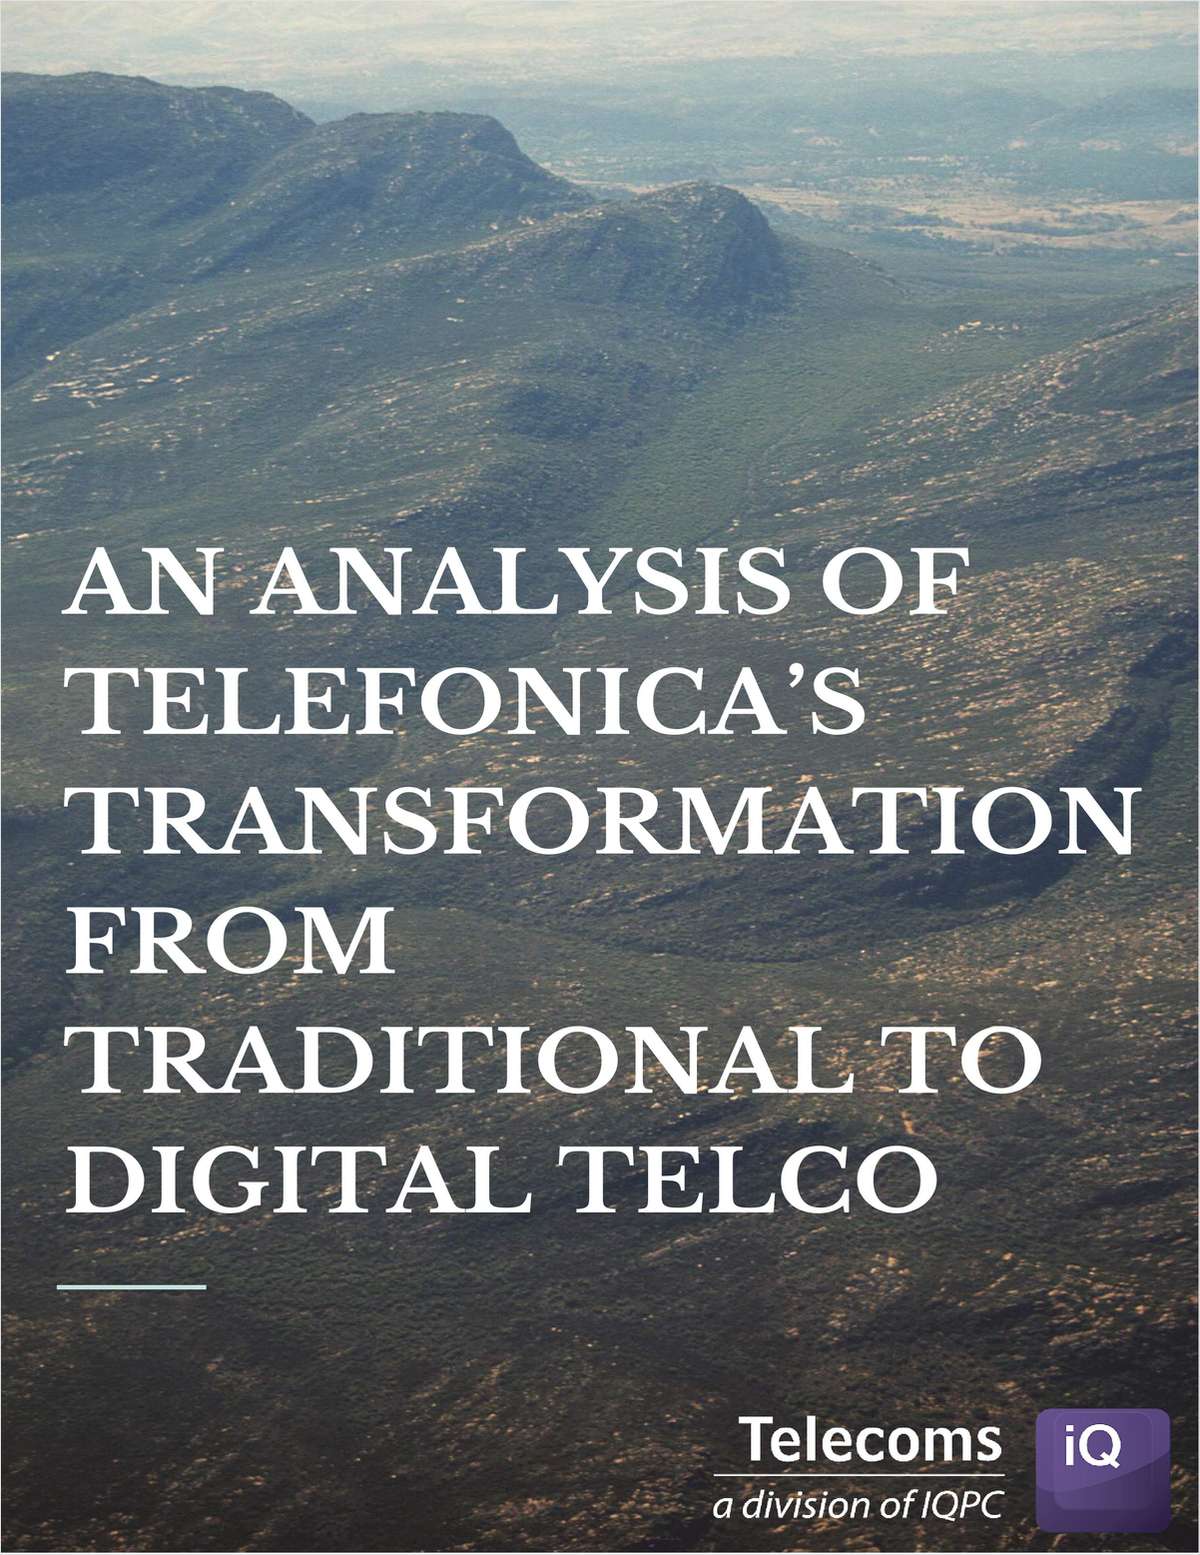 An Analysis of Telefonica's Transformation from Traditional to Digital Telco